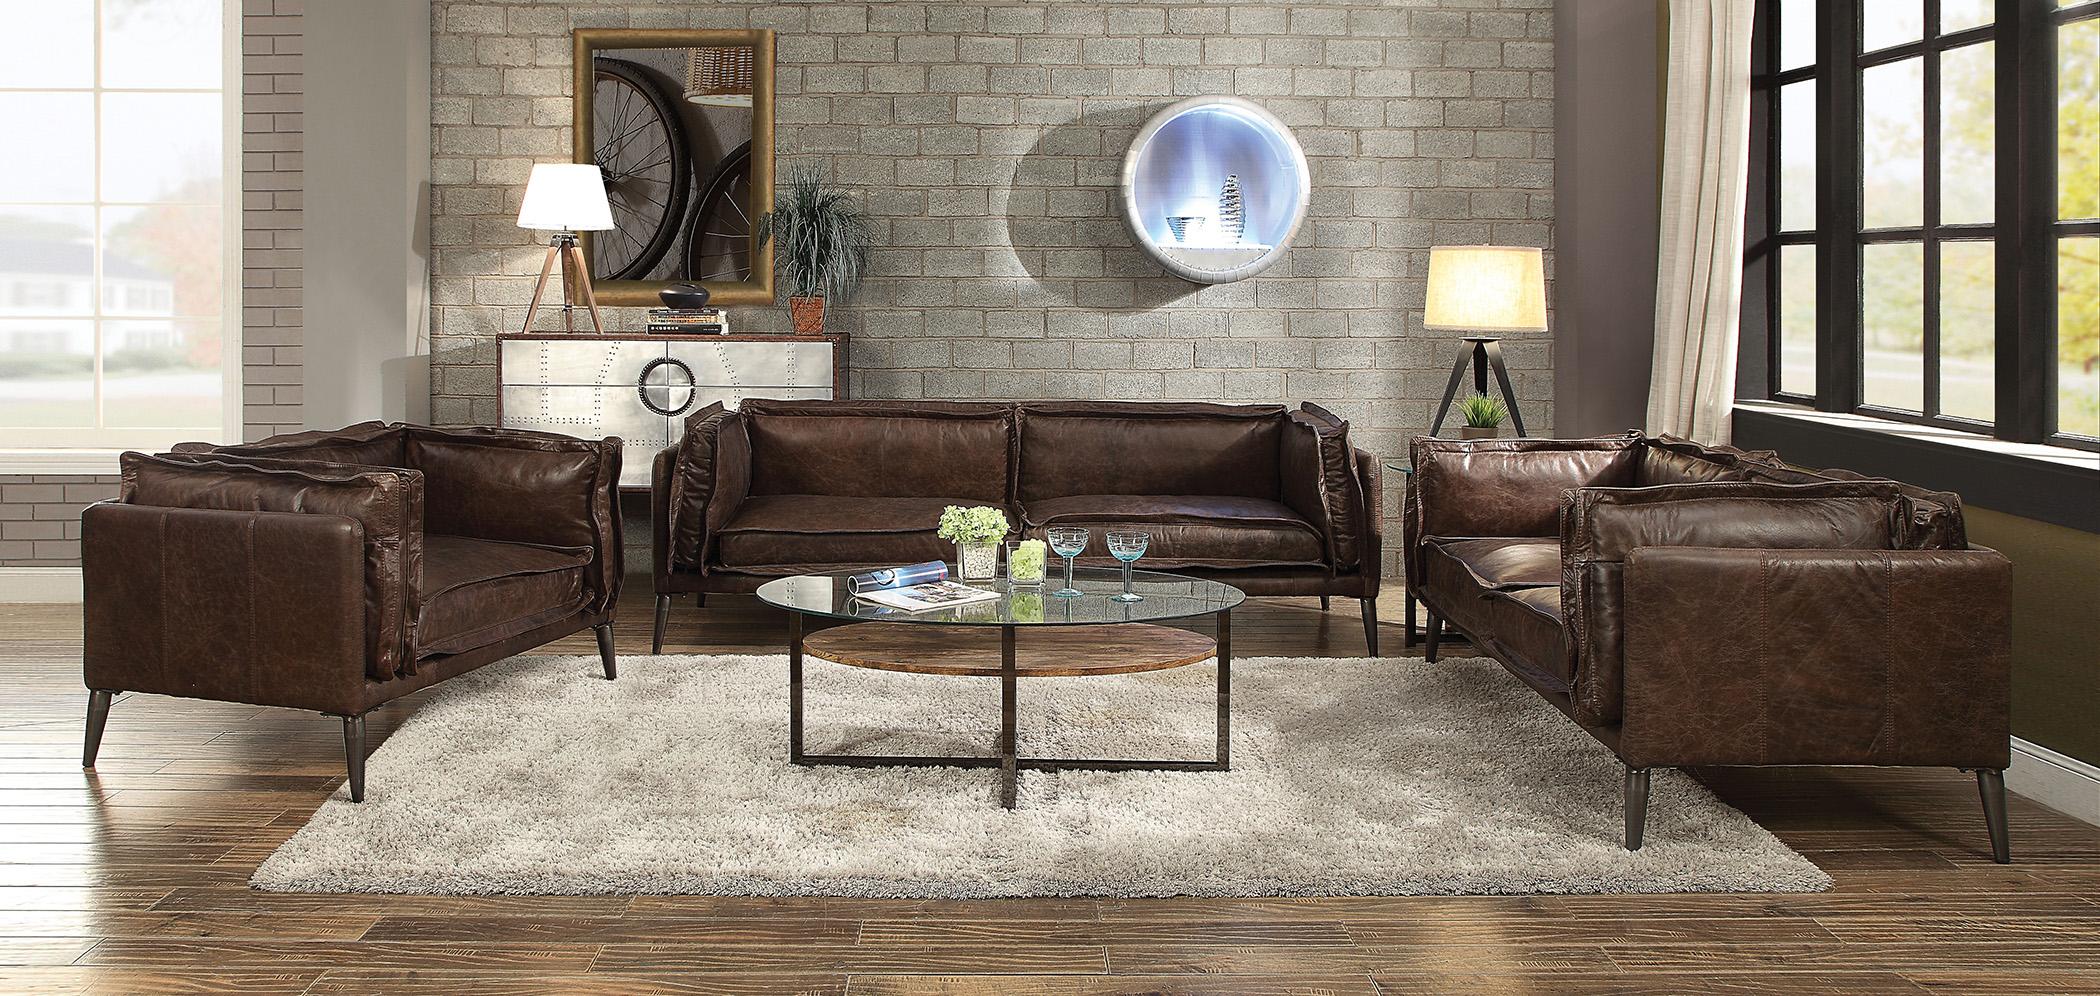 Contemporary,  Vintage Sofa Loveseat and Chair Set SKU: AHST6015 SKU: AHST6015 in Chocolate, Brown Top grain leather